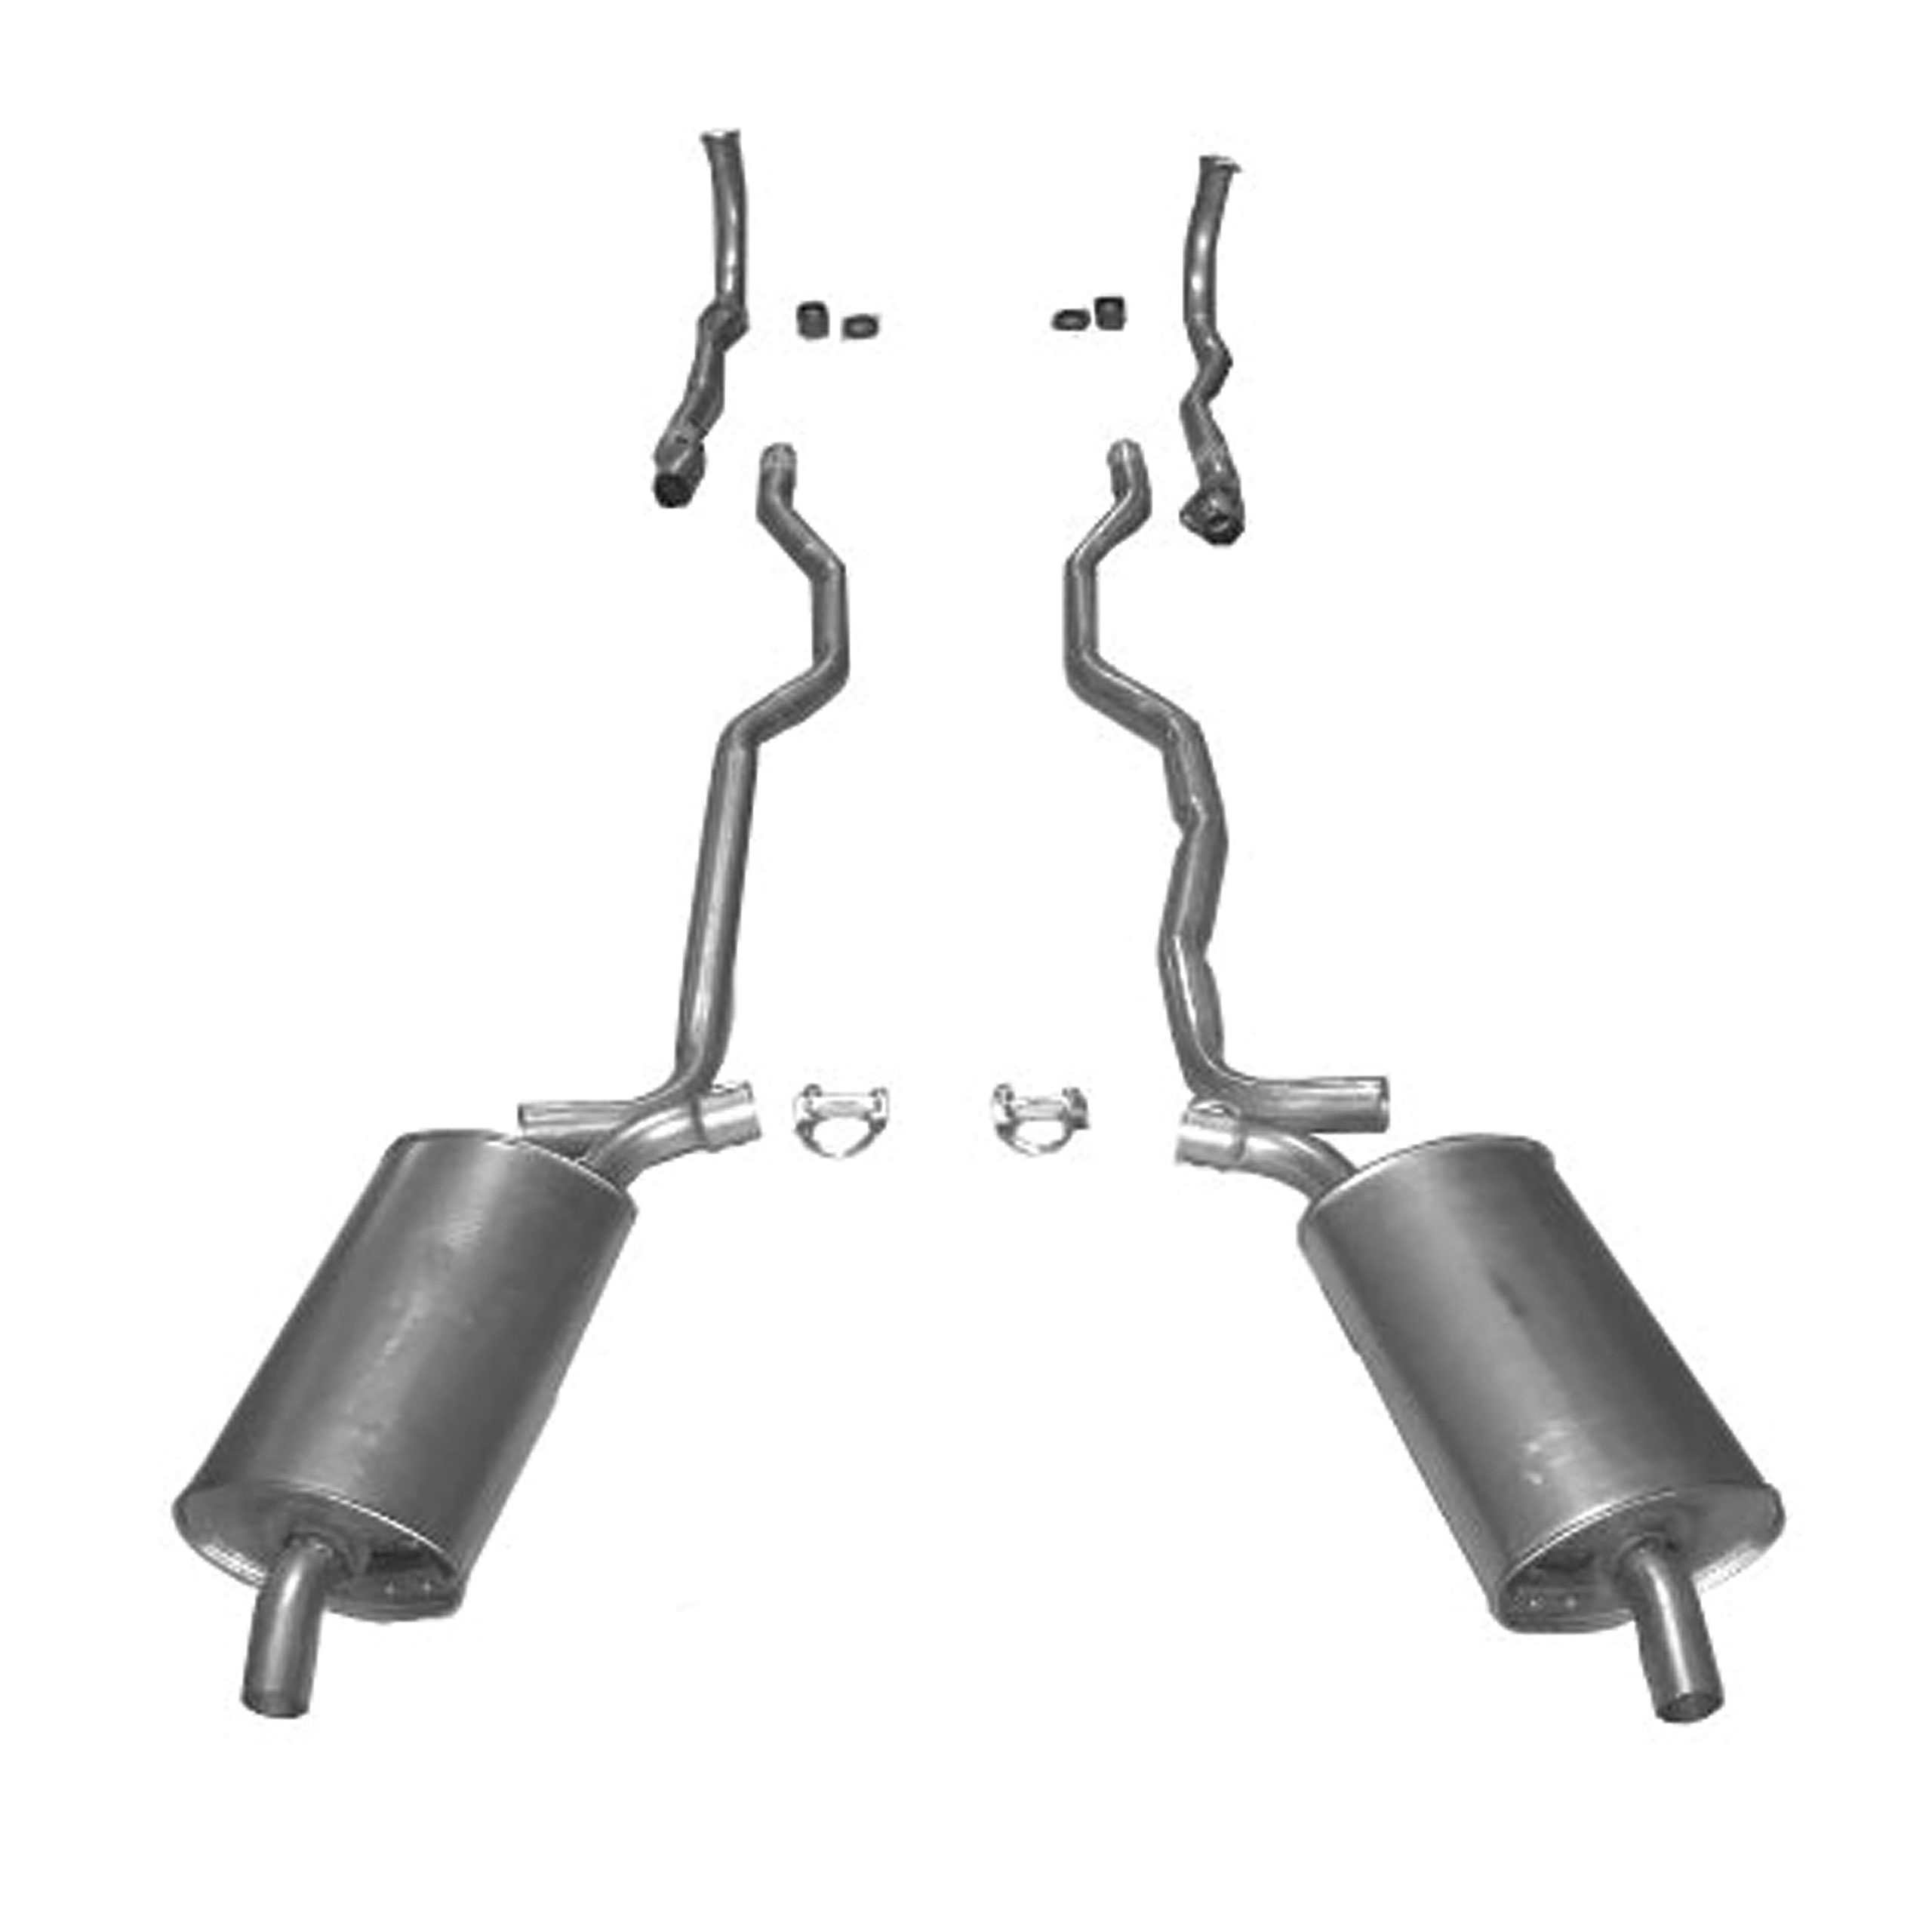 C2 1963 Chevrolet Corvette Exhaust System - 2.5 Inch - Manual W/Separate Secondary Pipe & Muffler - Auto Accessories of America